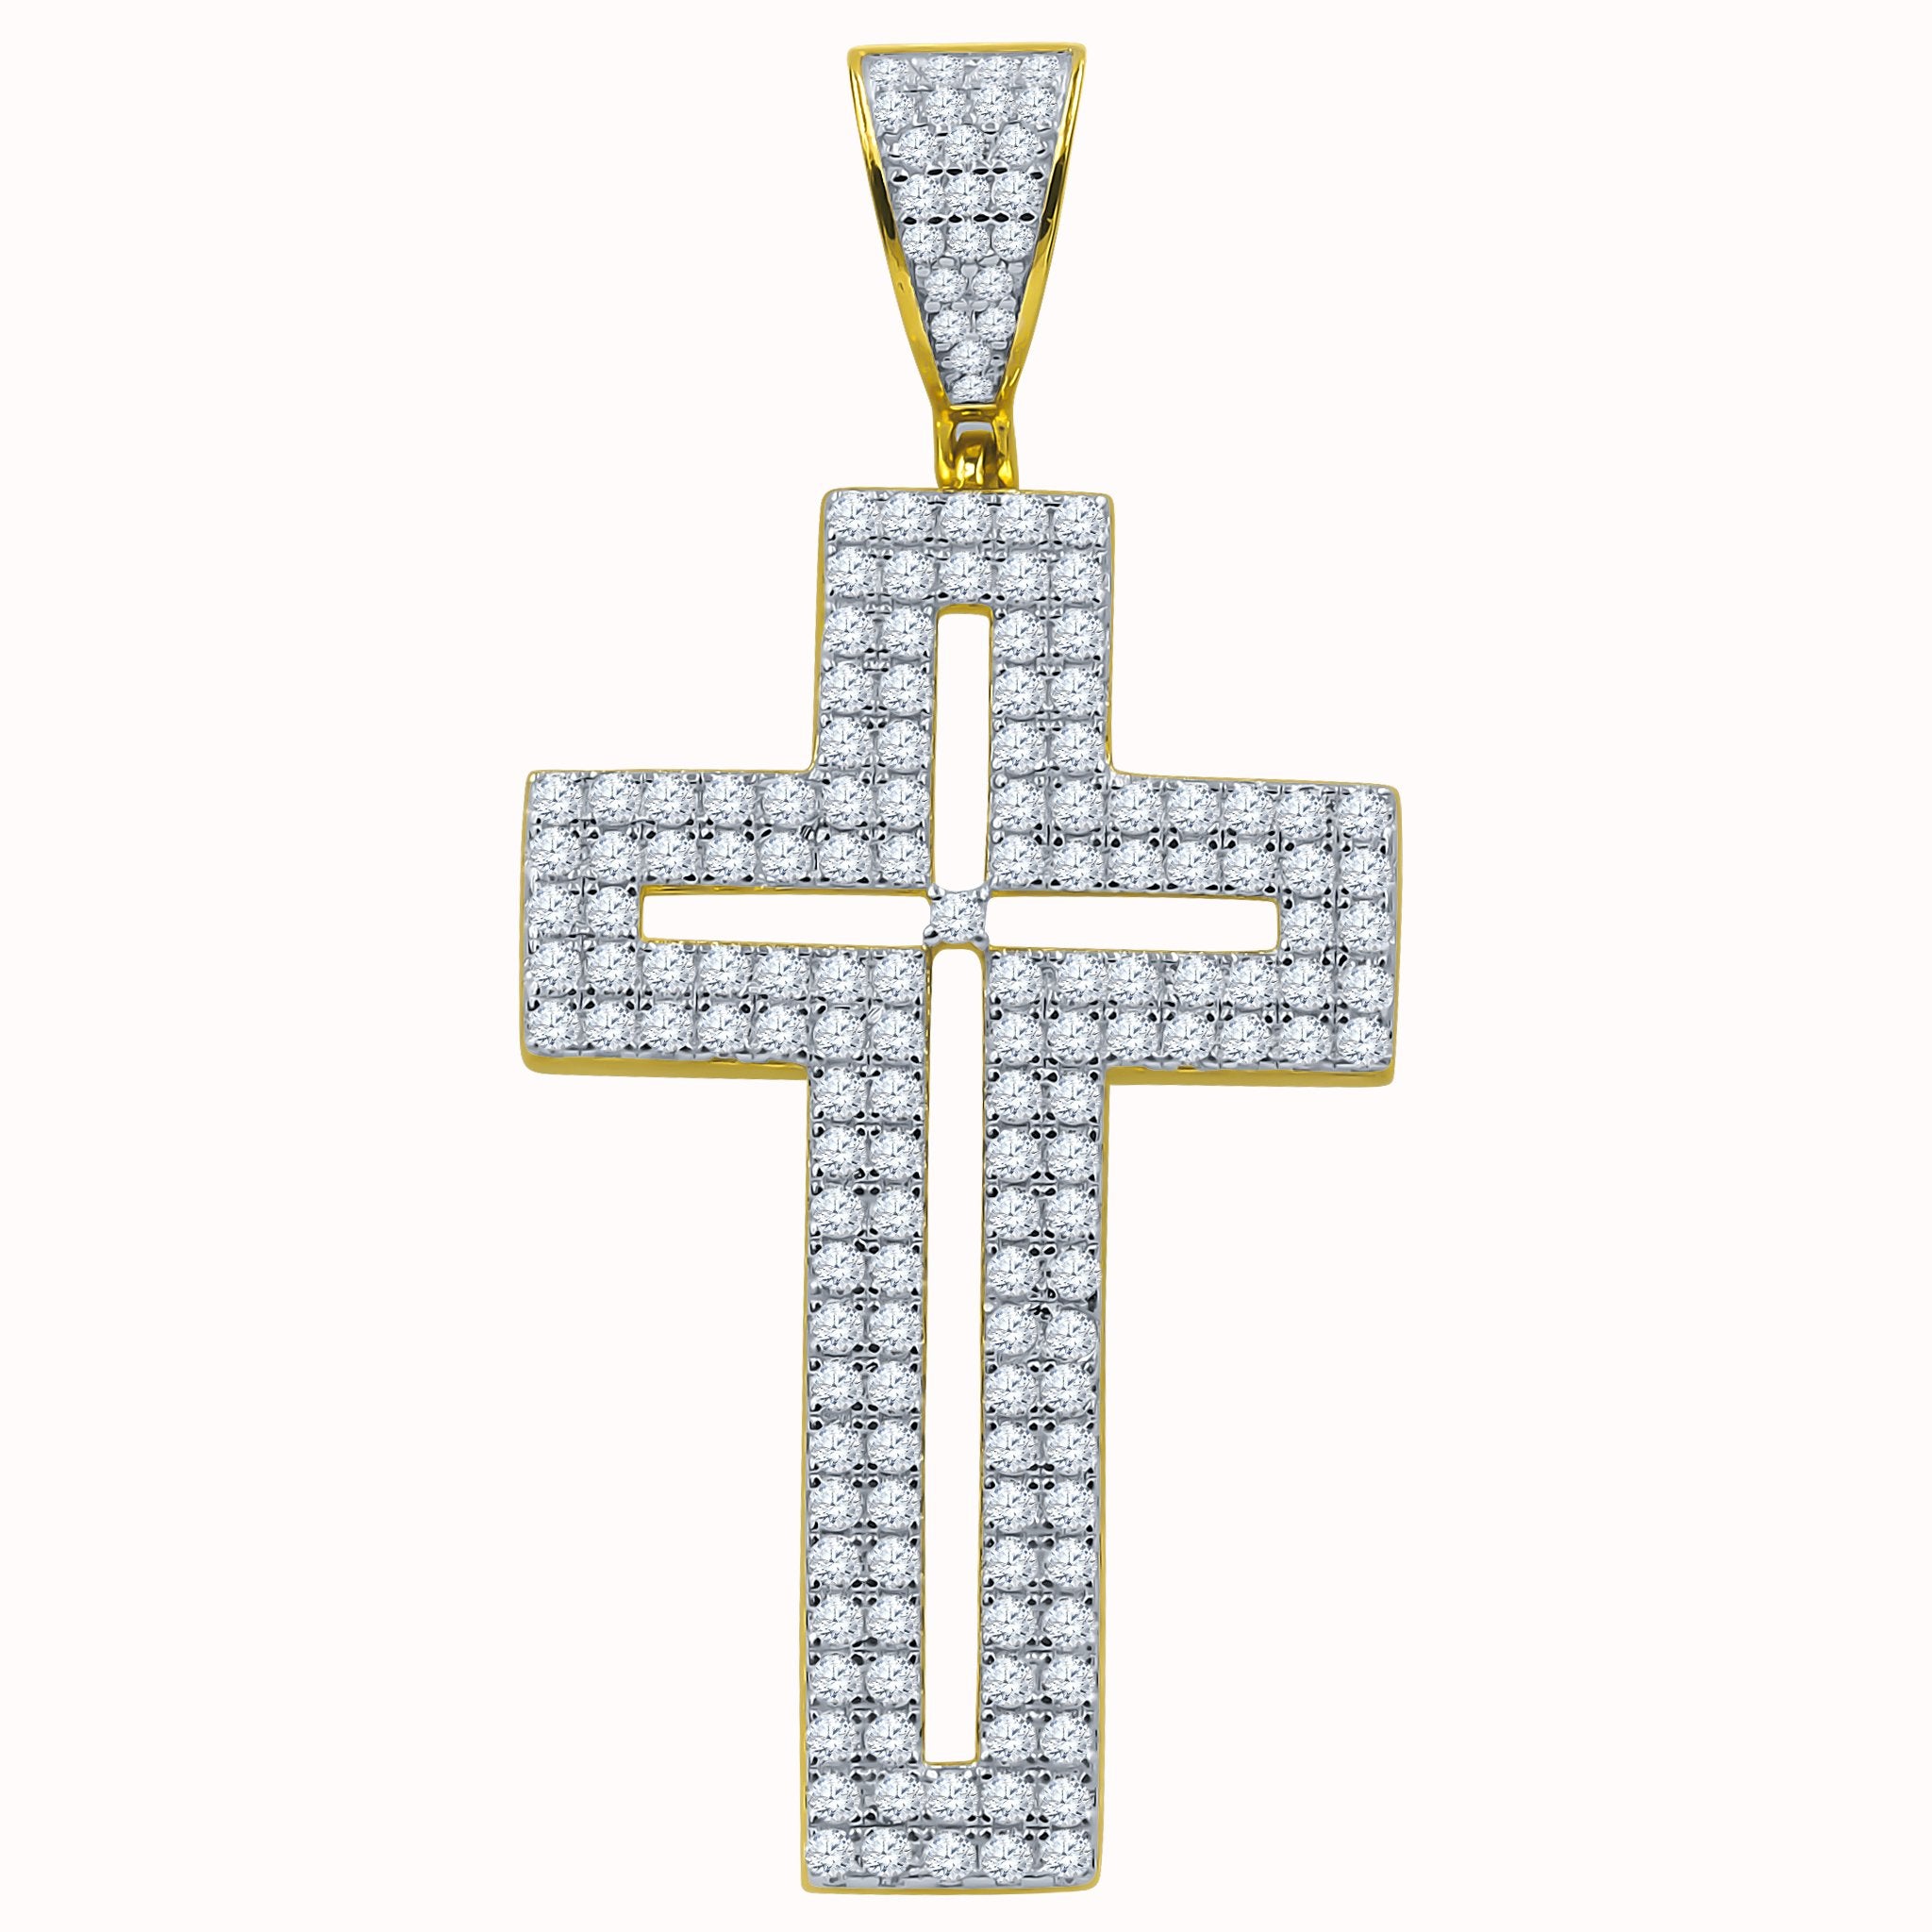 Resilient Love CZ Silver Cross Pendant - 925 Sterling Silver, 45mm Length, 12g Weight - Pendants, Stones & Charms - Bijou Her -  -  - 